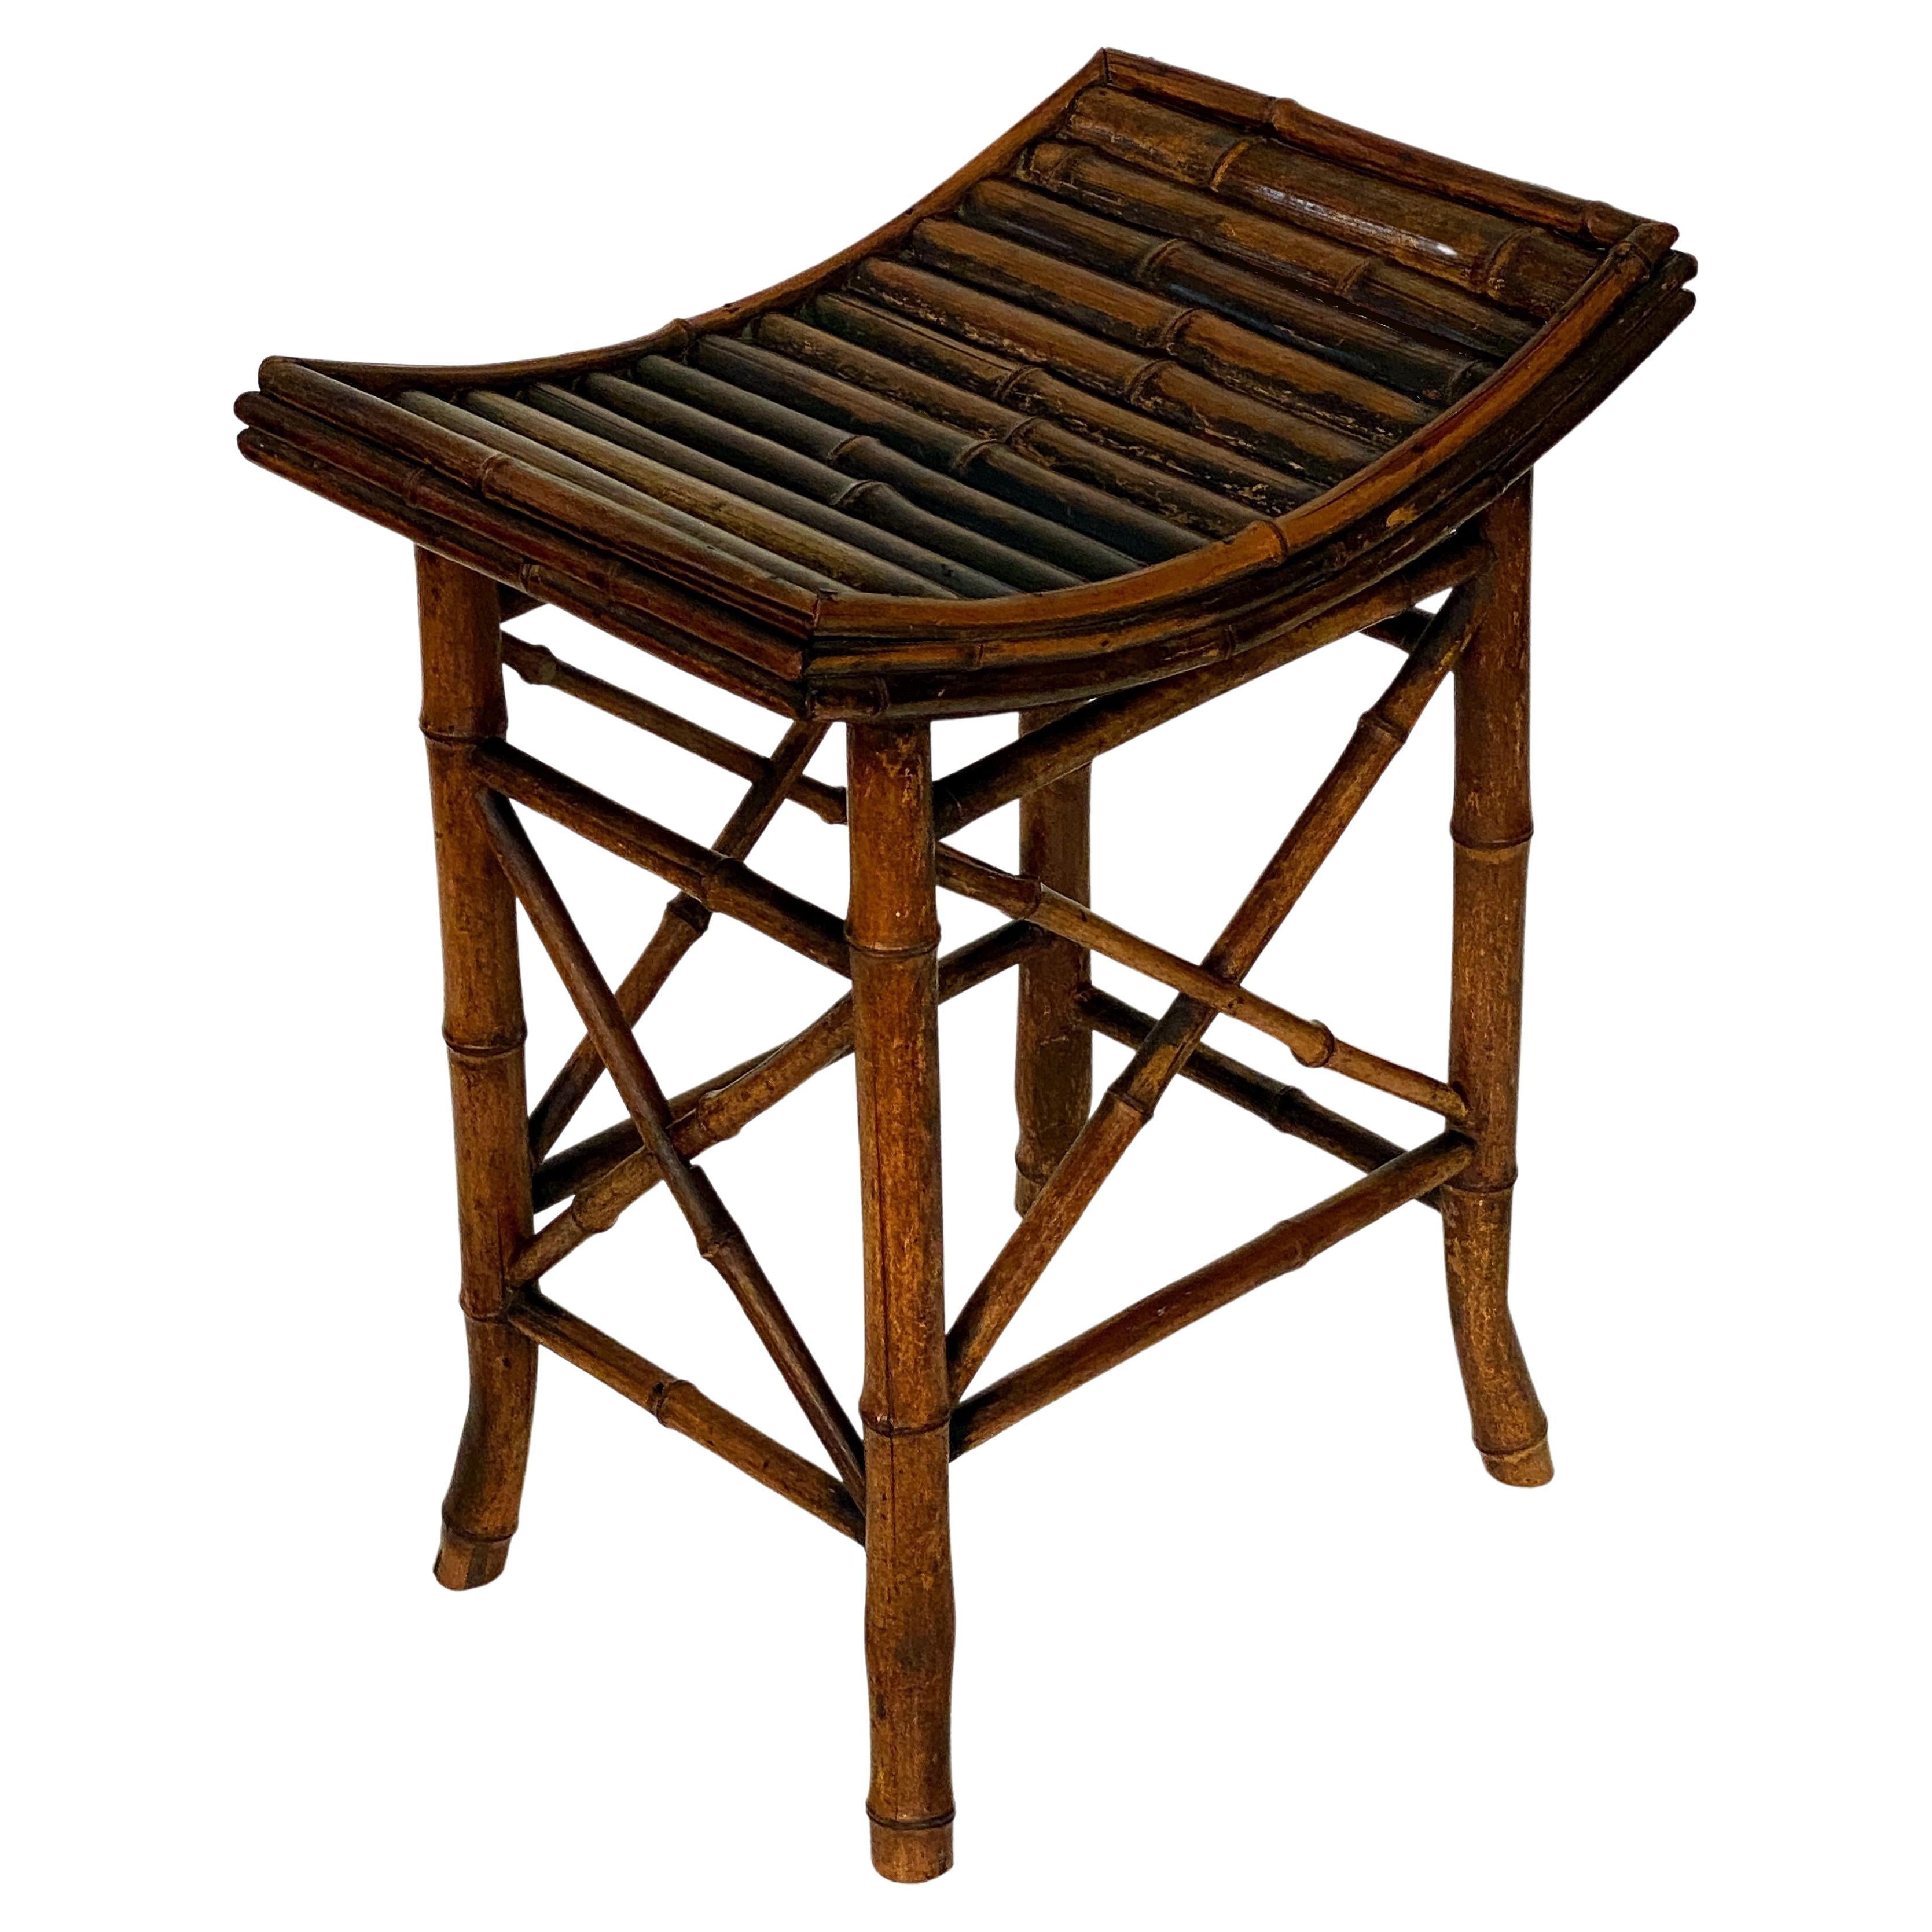 English Bamboo Bench or Stool with Saddle Seat from the Aesthetic Movement Era